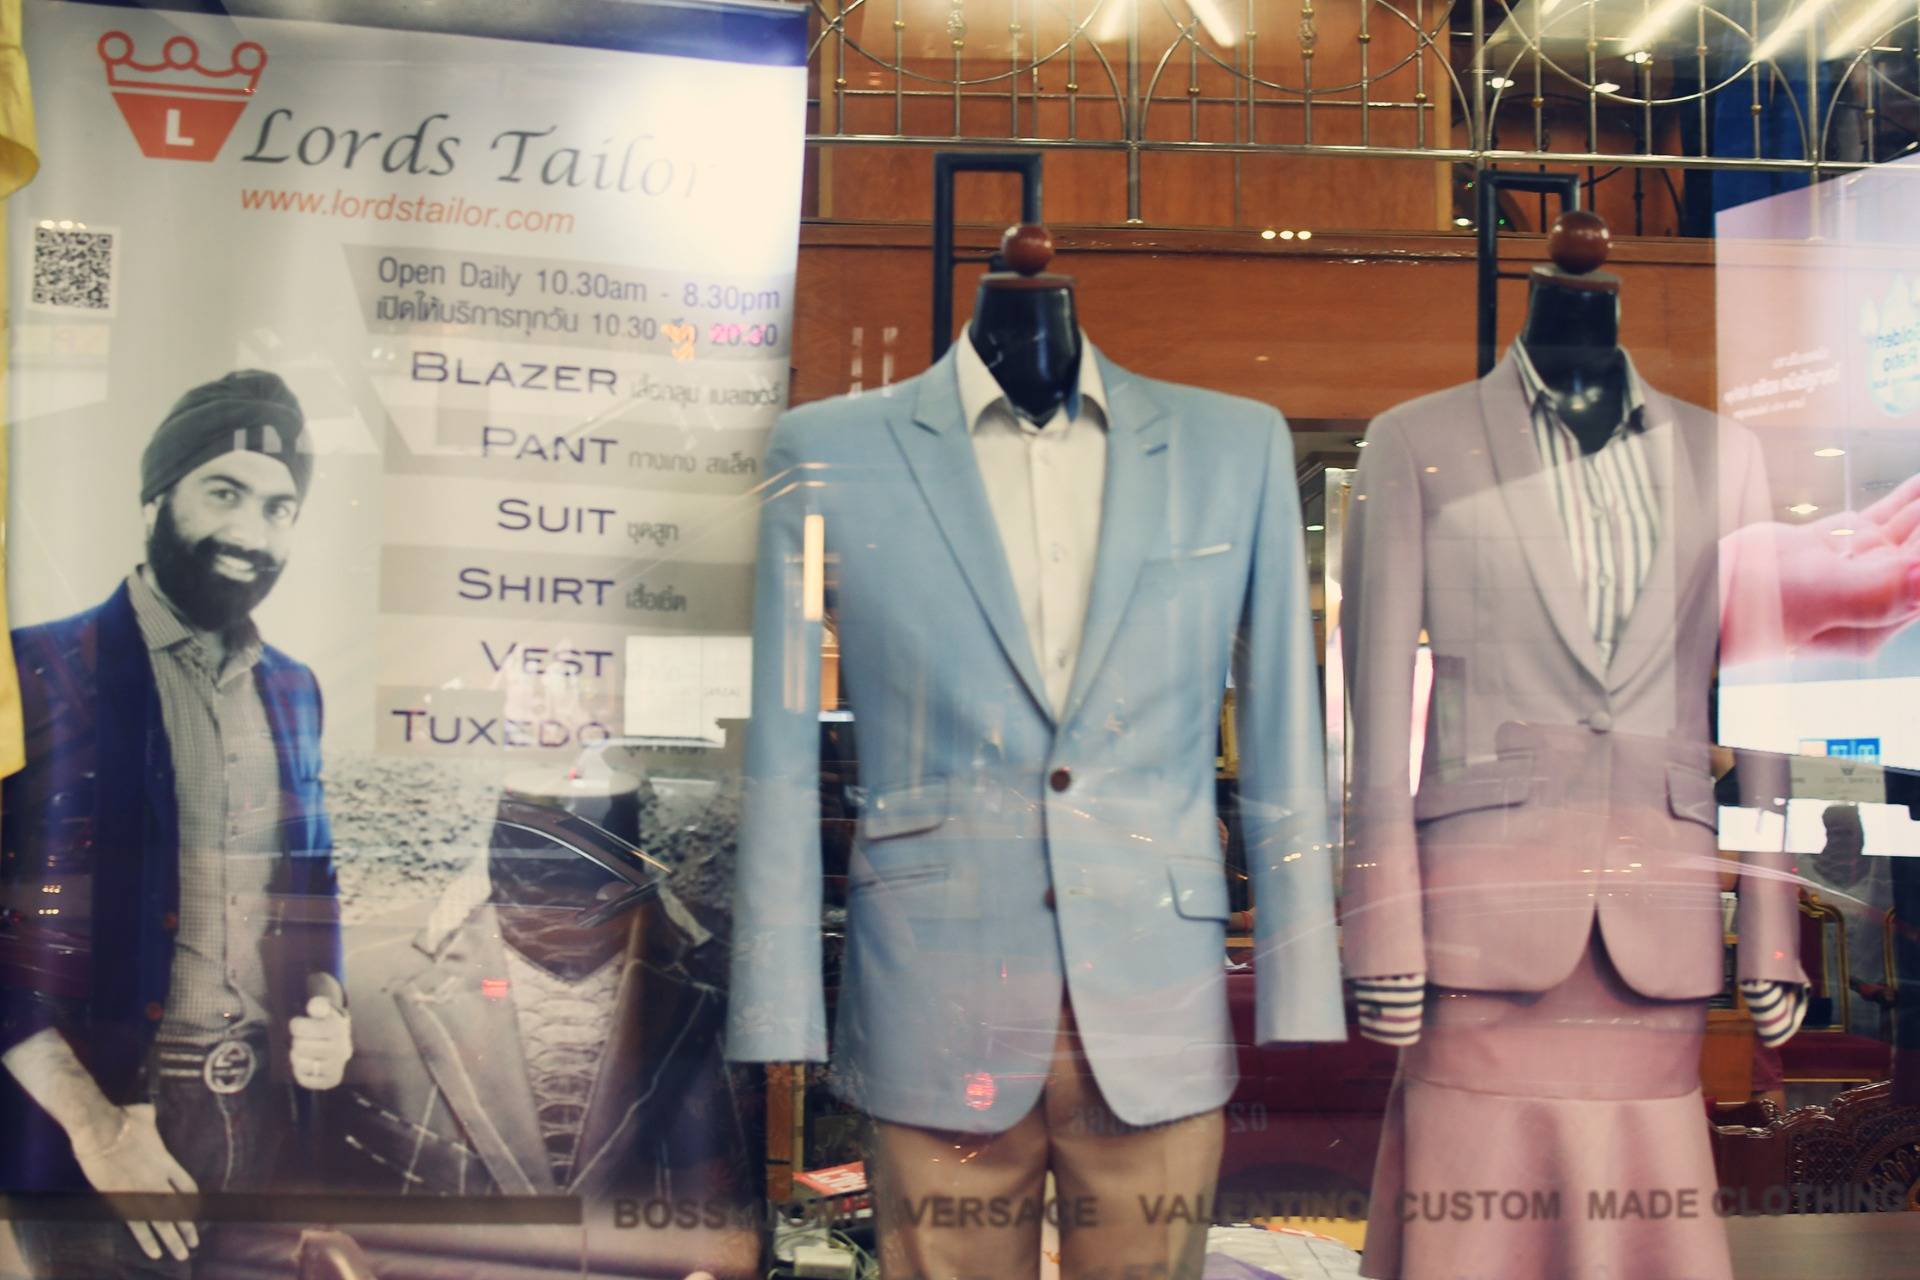 Sukamvit area is the most popular for tailors